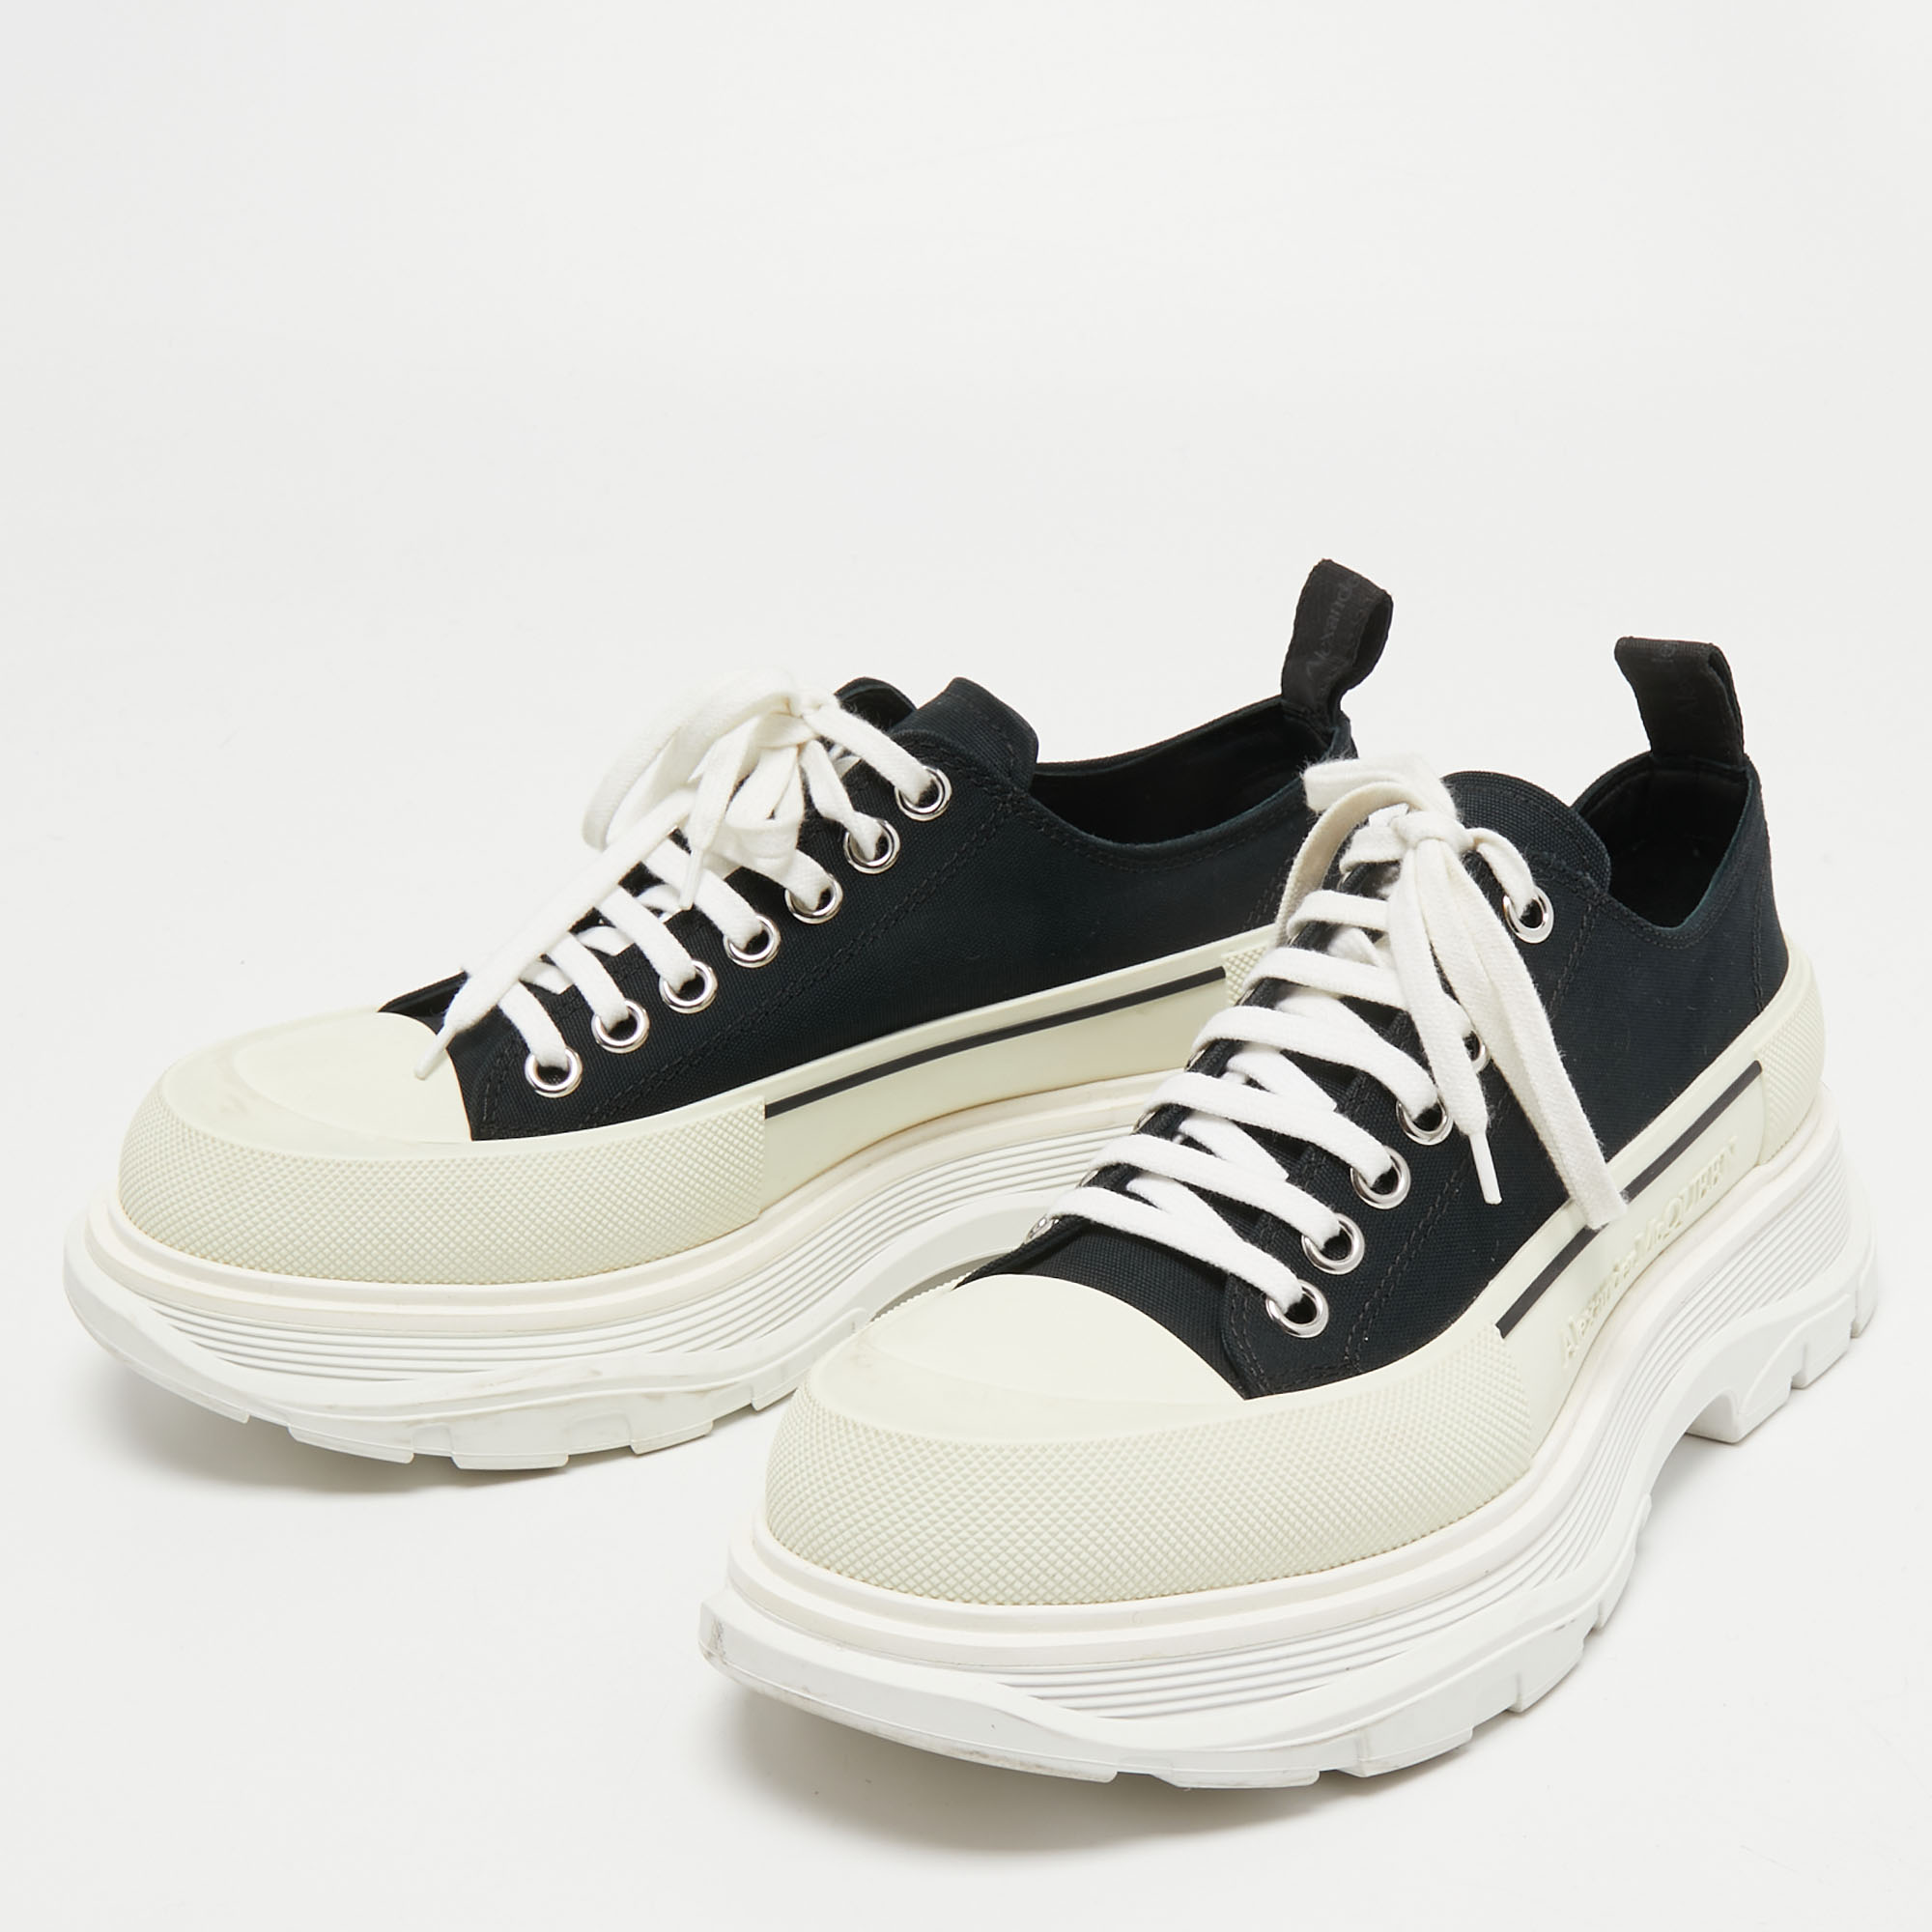 

Alexander McQueen Black/White Canvas and Rubber Tread Slick Sneakers Size